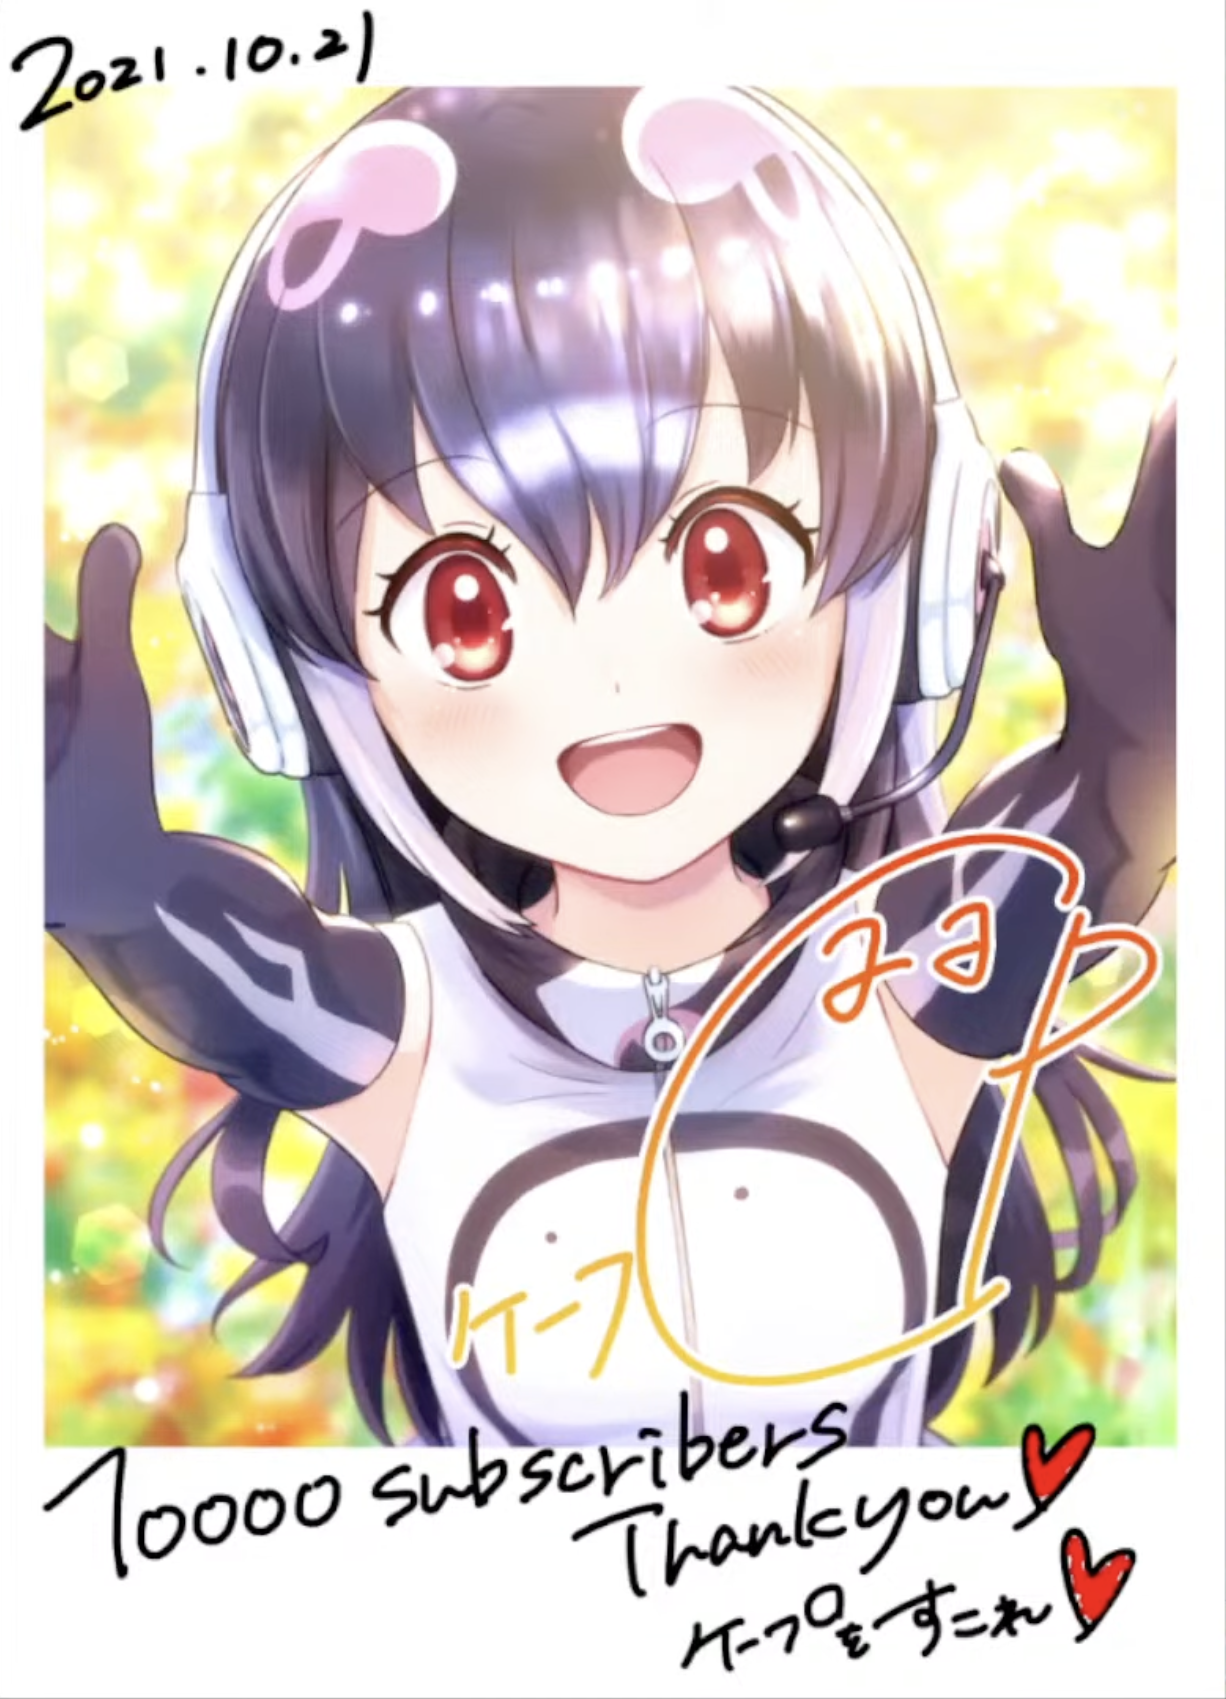 Official art with her signature for her autograph session celebrating 10,000 subscribers.